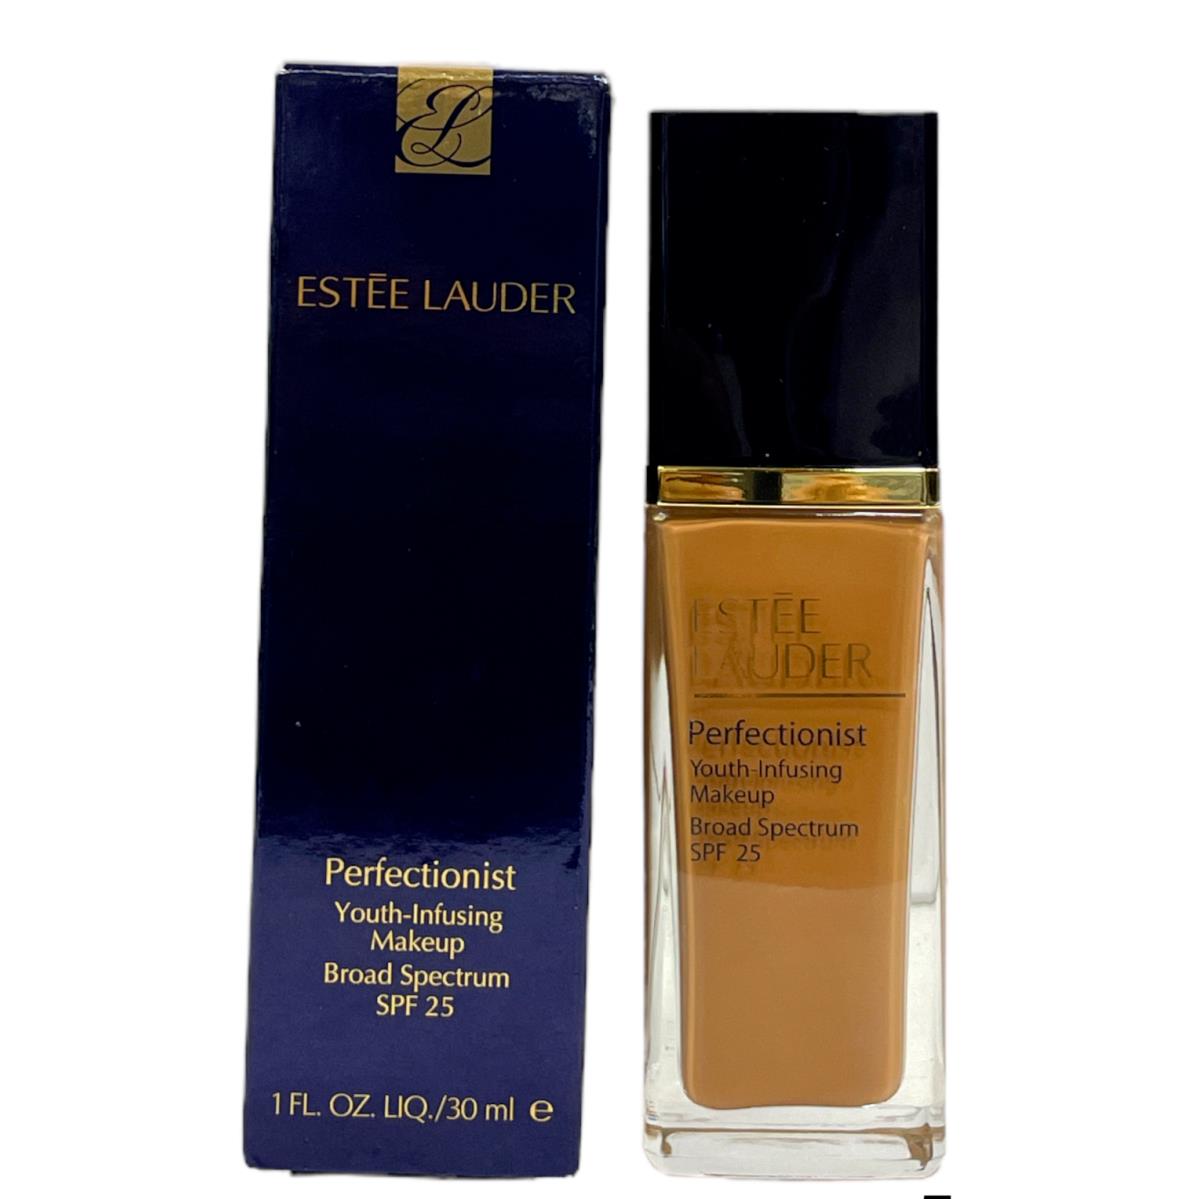 Estee Lauder Perfectionist Youth Infusing Makeup SPF25 1oz / 30mL You Pick 5W2 RICH CARAMEL